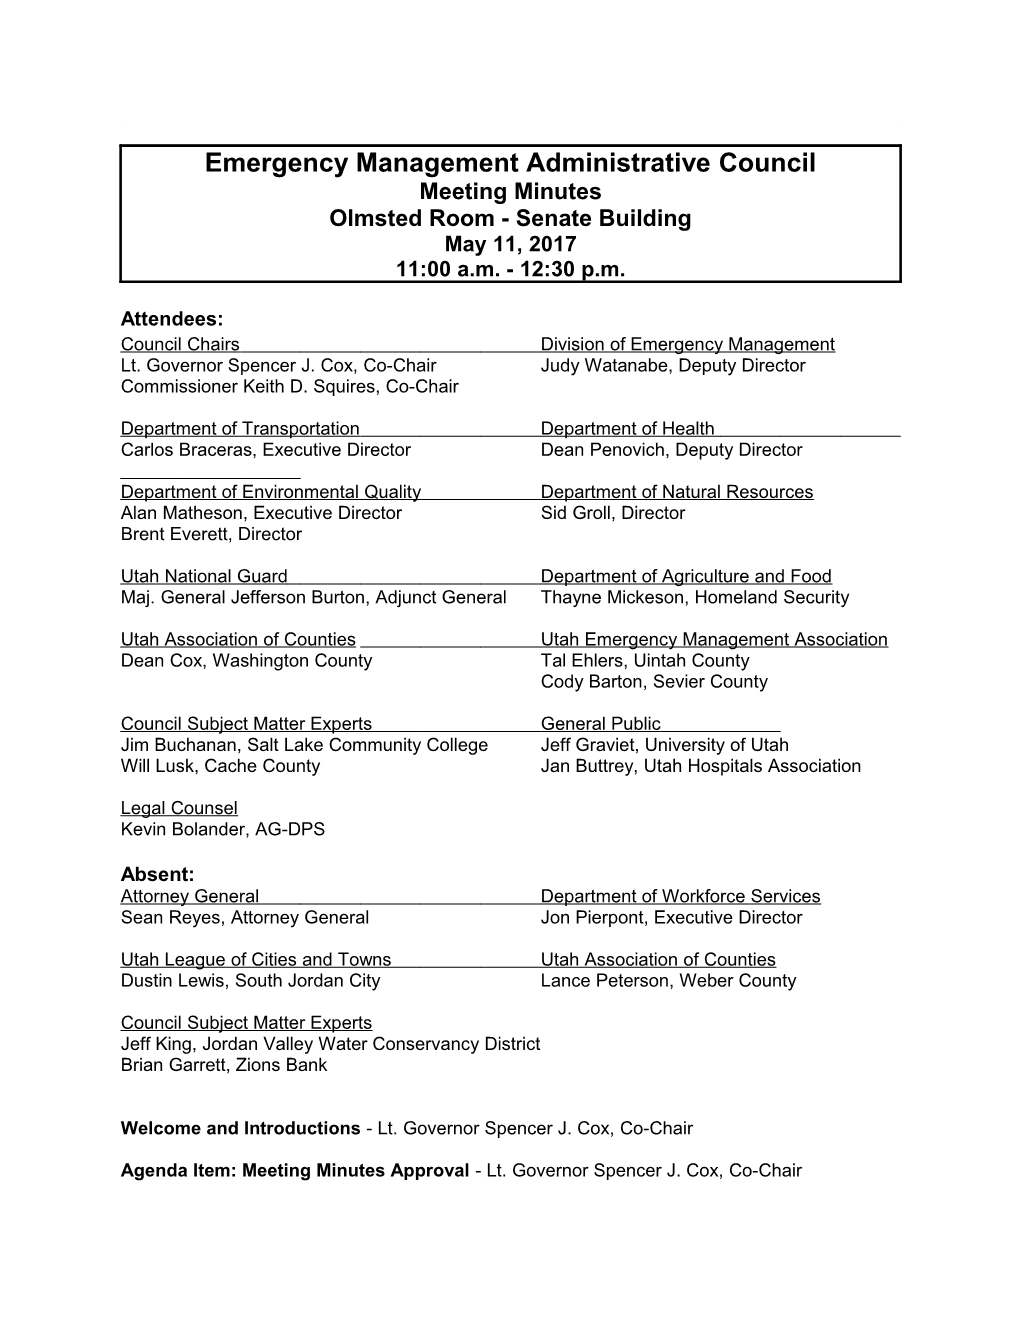 Council Chairs Division of Emergency Management